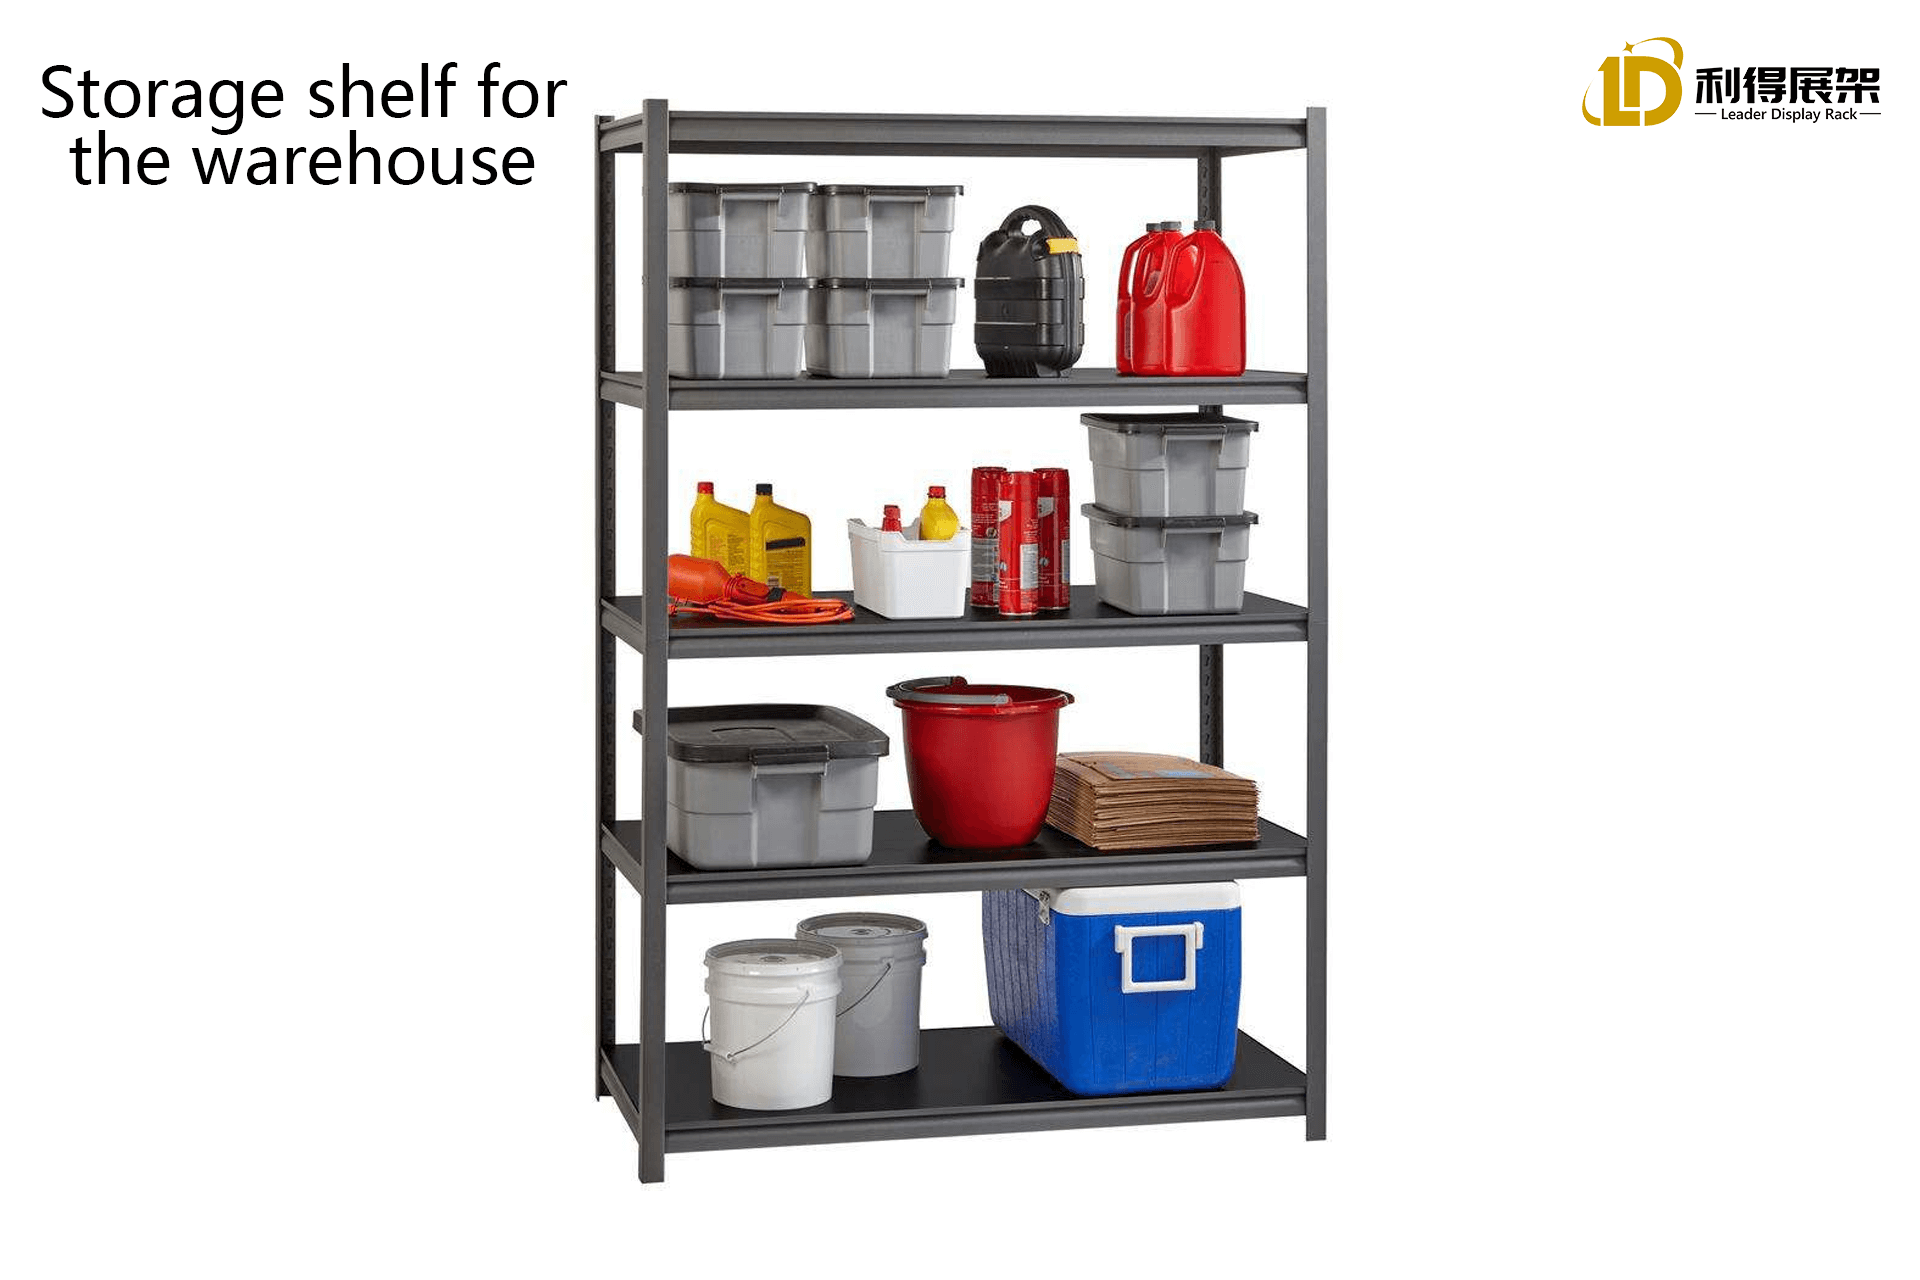 The Material And Structure of The Warehouse Storage Shelf, How To Choose The Most Suitable Storage Scheme